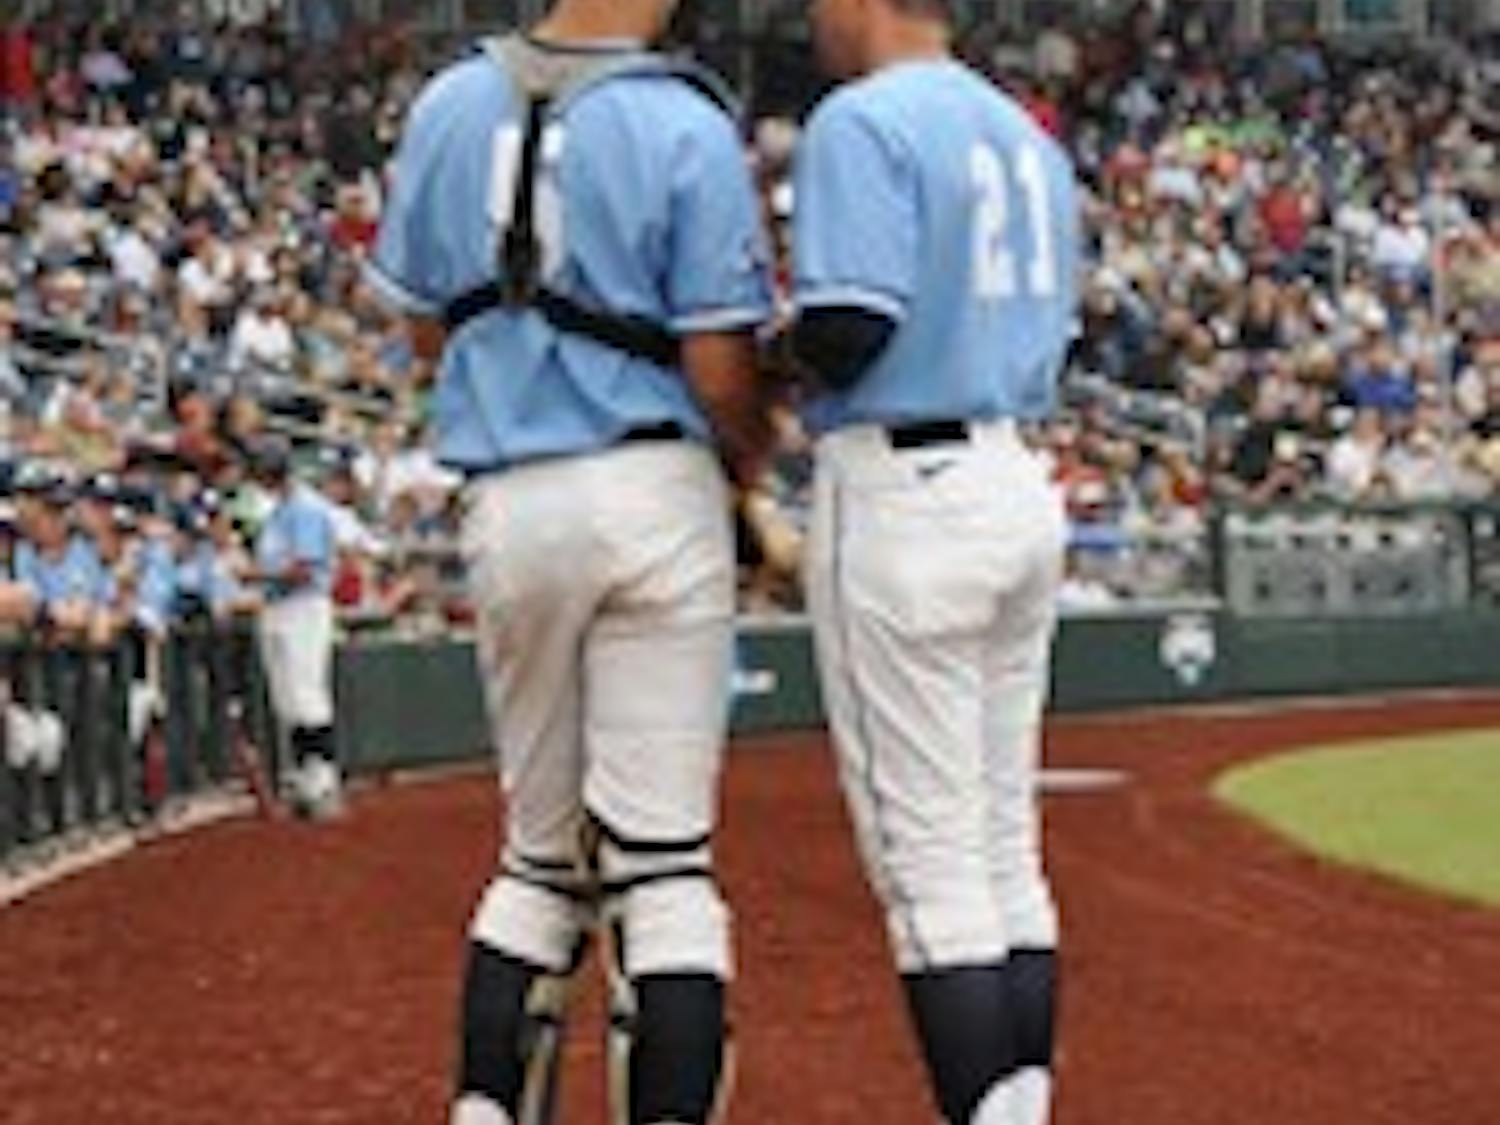 	The University of North Carolina Tar Heels played the Vanderbilt University Commodores on Wednesday, June 22, 2011 at Omaha’s TD Ameritrade Park. The Tar Heels lost 5-1, eliminating them from the College World Series. 